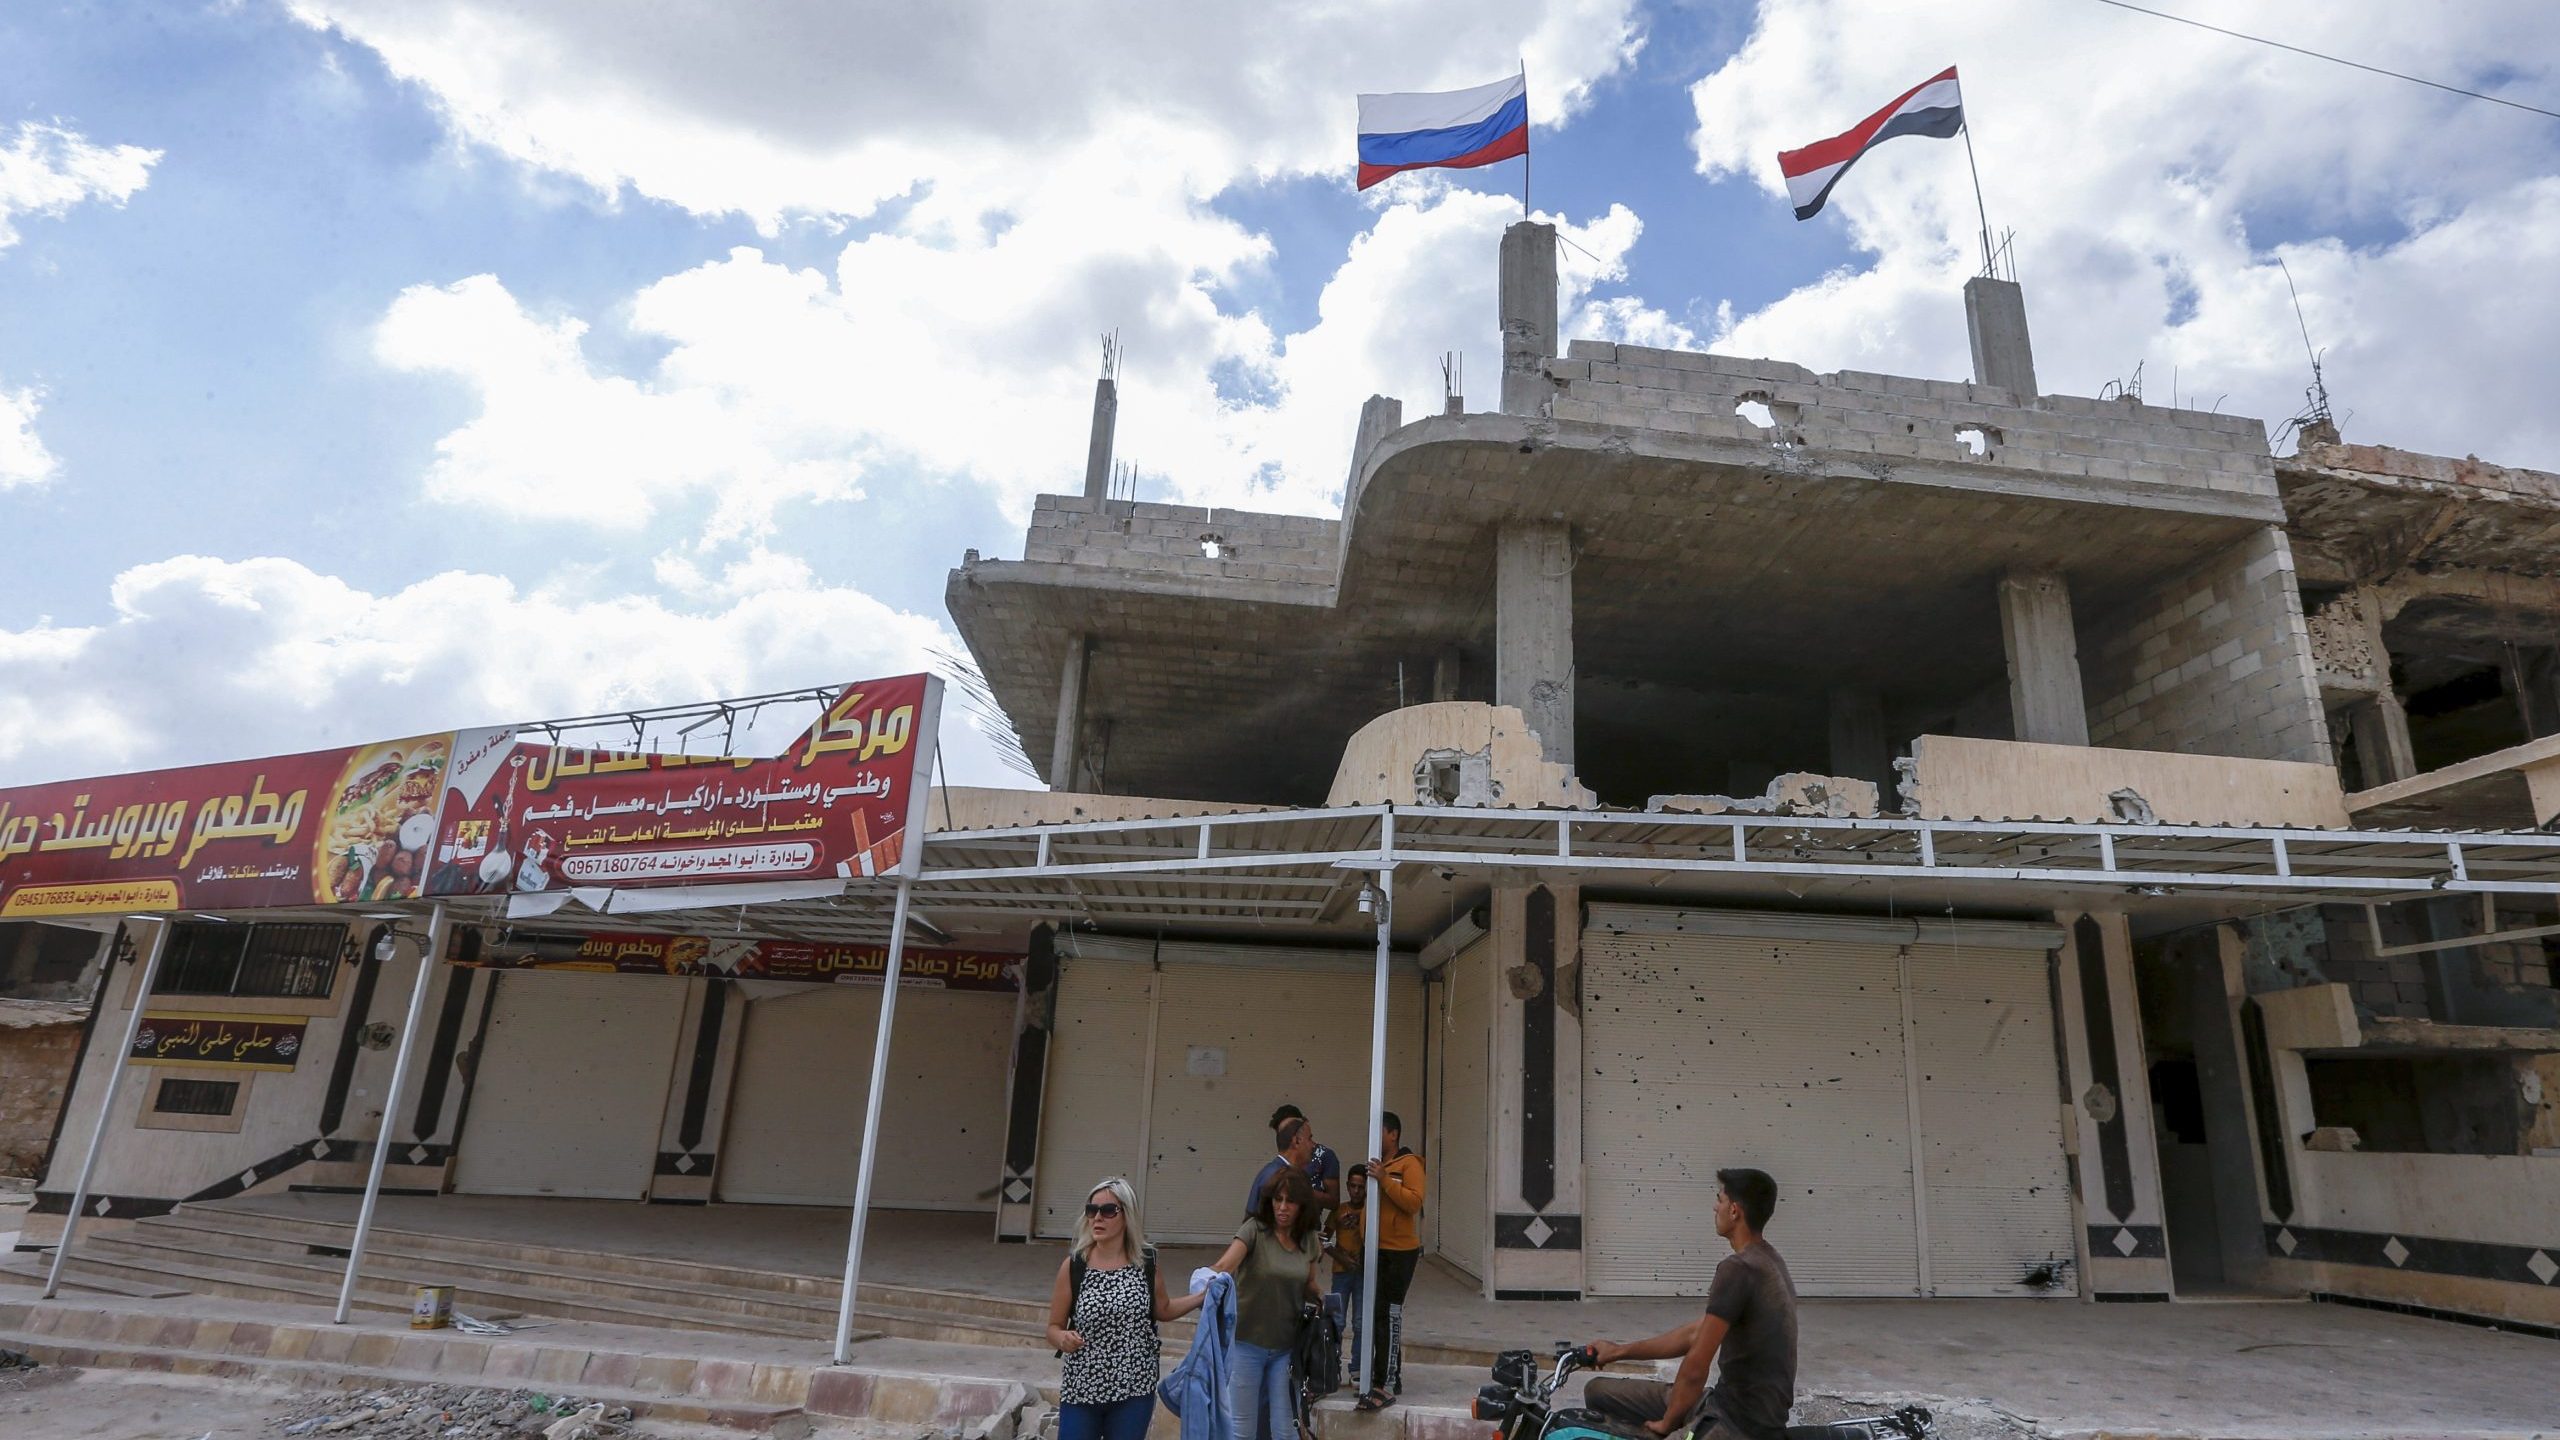 New Russian Movements in Syria: What Reasons?